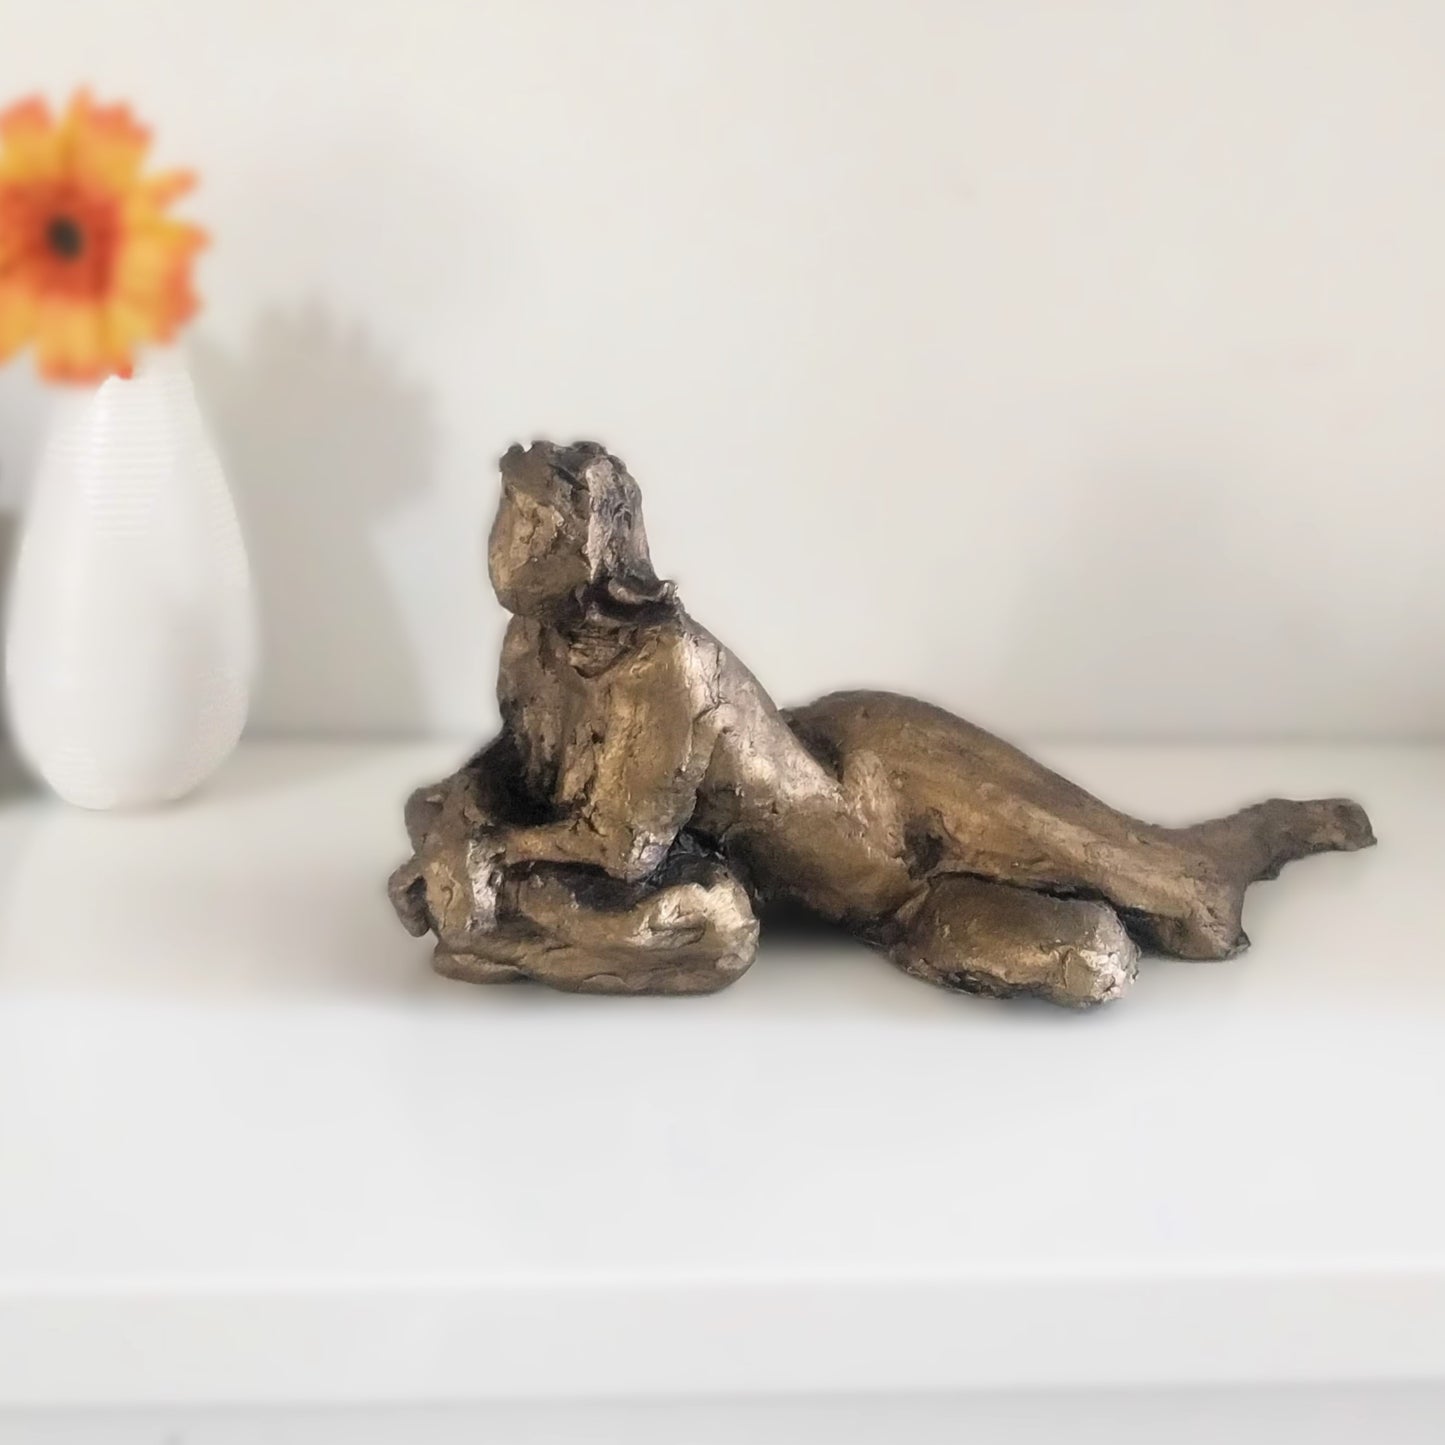 This sculpture is a study of the human form, capturing a reclining figure with an emphasized gesture. It is a beginner's piece in figure sculpture, sculpted in water-based clay, and measures approximately 9 inches in length. The work, showing a figure in a pose that suggests contemplation or rest, was created by Elizabeth Bonura.